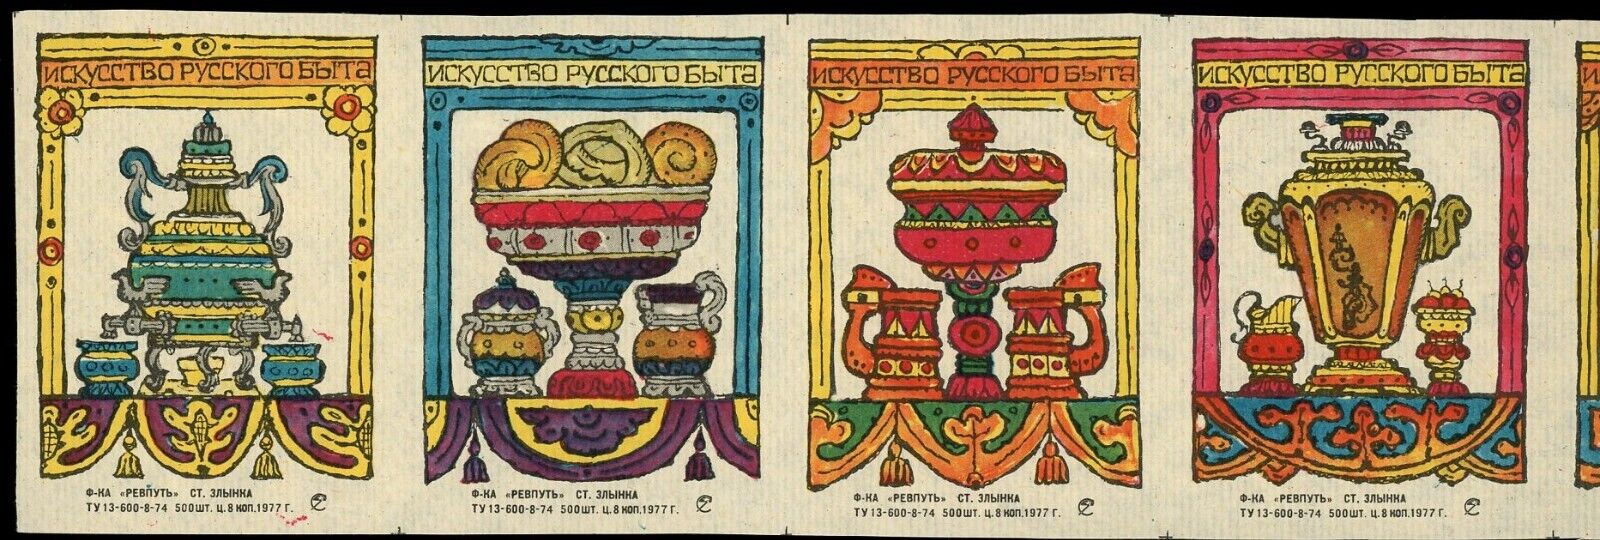 1977 Uncut Sheet of Russian Food and Drink 3x4 Colorful Match Book Labels (5) Без бренда - фотография #6